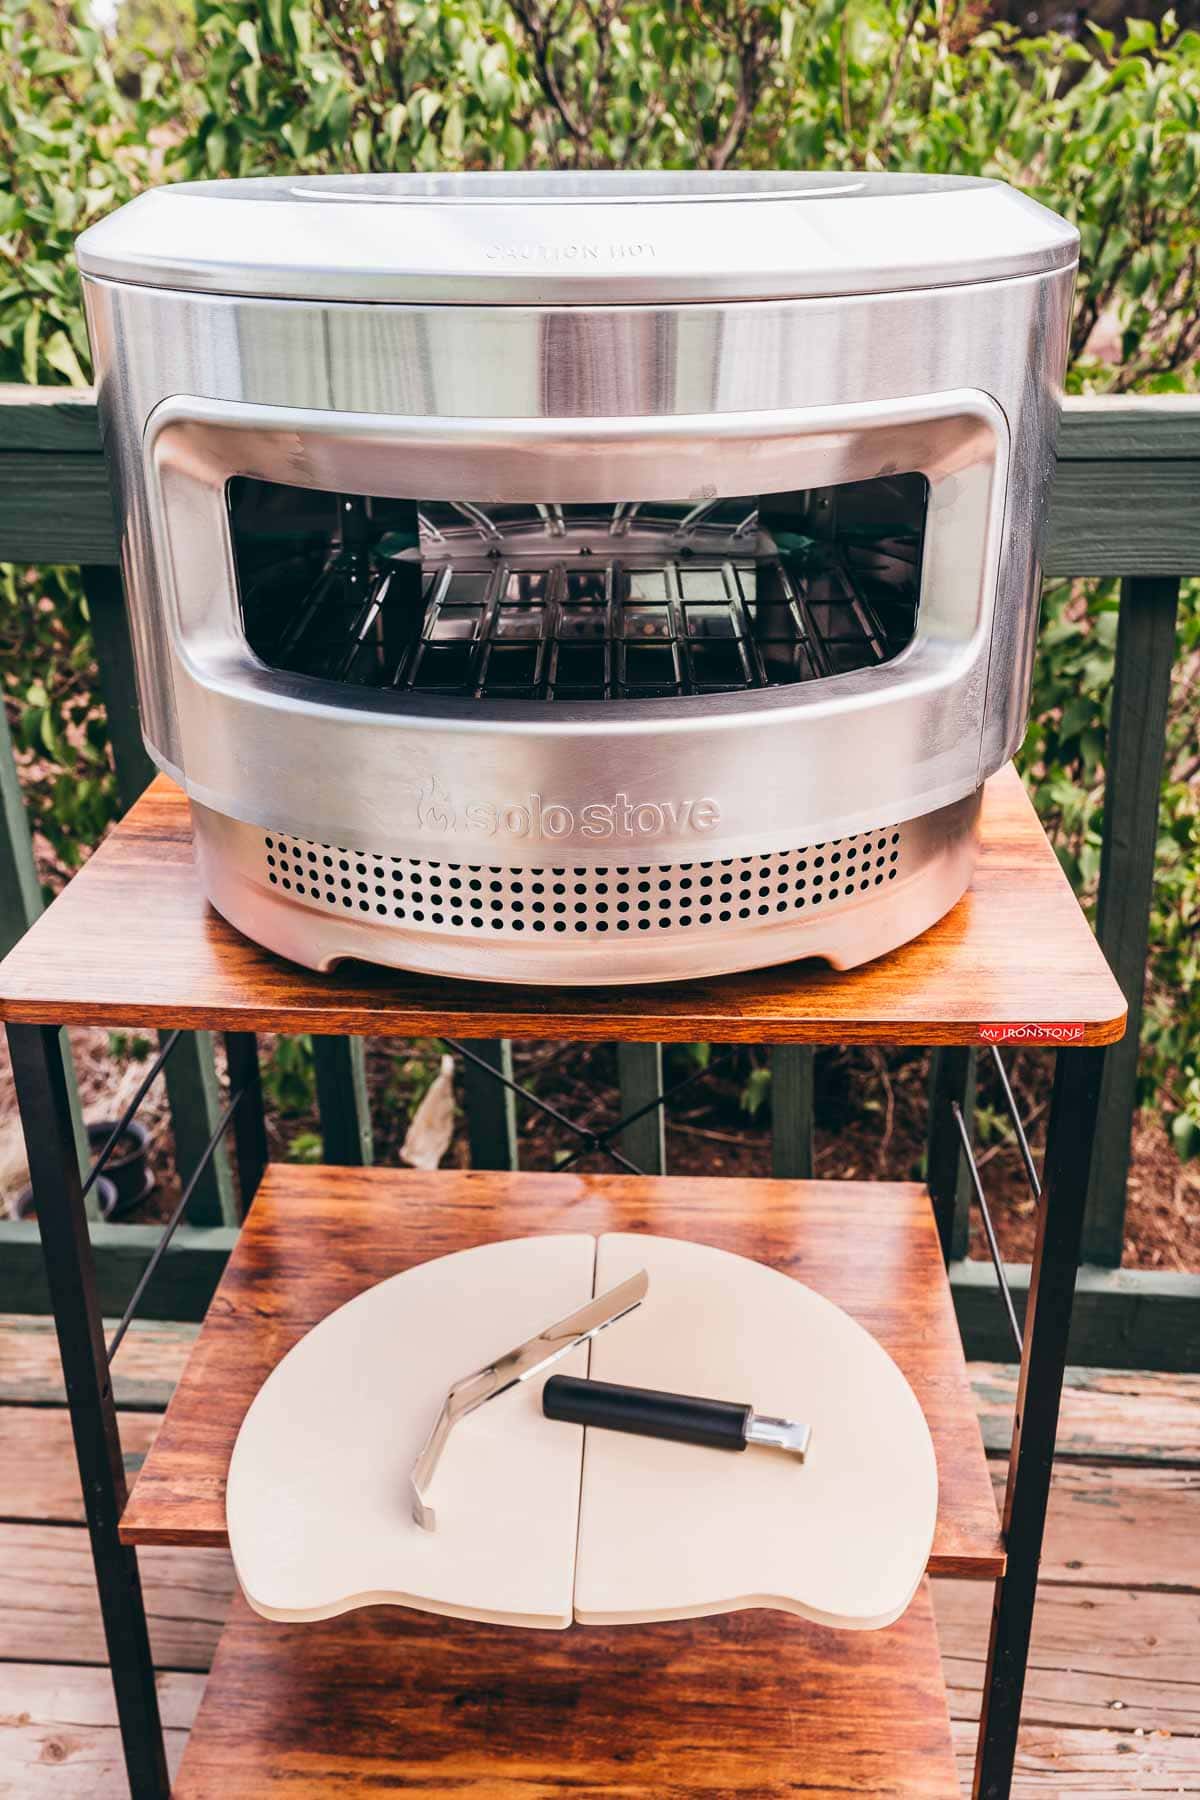 A Solo Stove pizza oven on a wooden table.